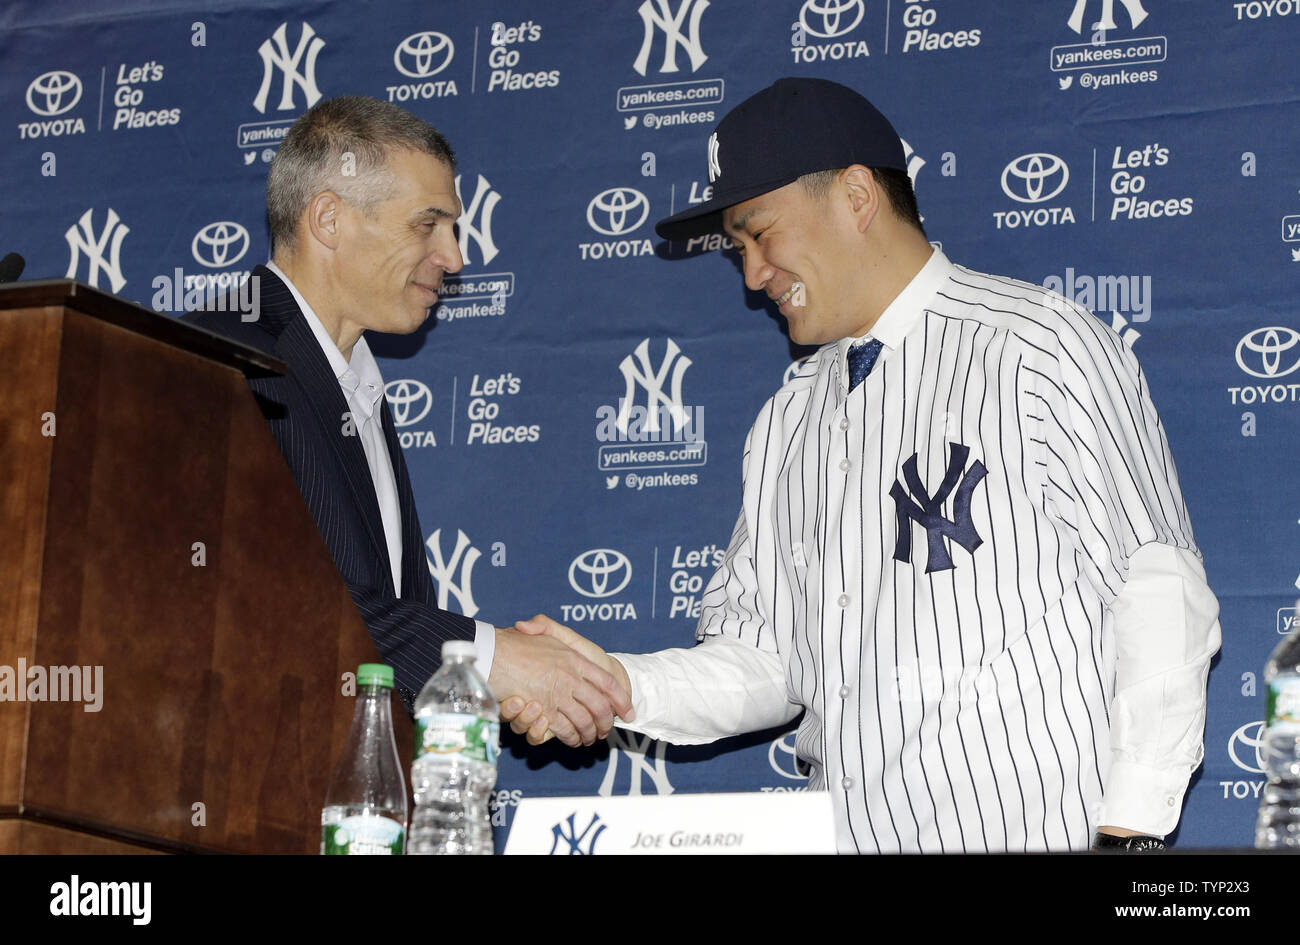 New York Yankees Manager Joe Girardi shakes hands with Masahiro Tanaka who  is wearing his new Yankee jersey and cap at a press conference at Yankee  Stadium in New York City on